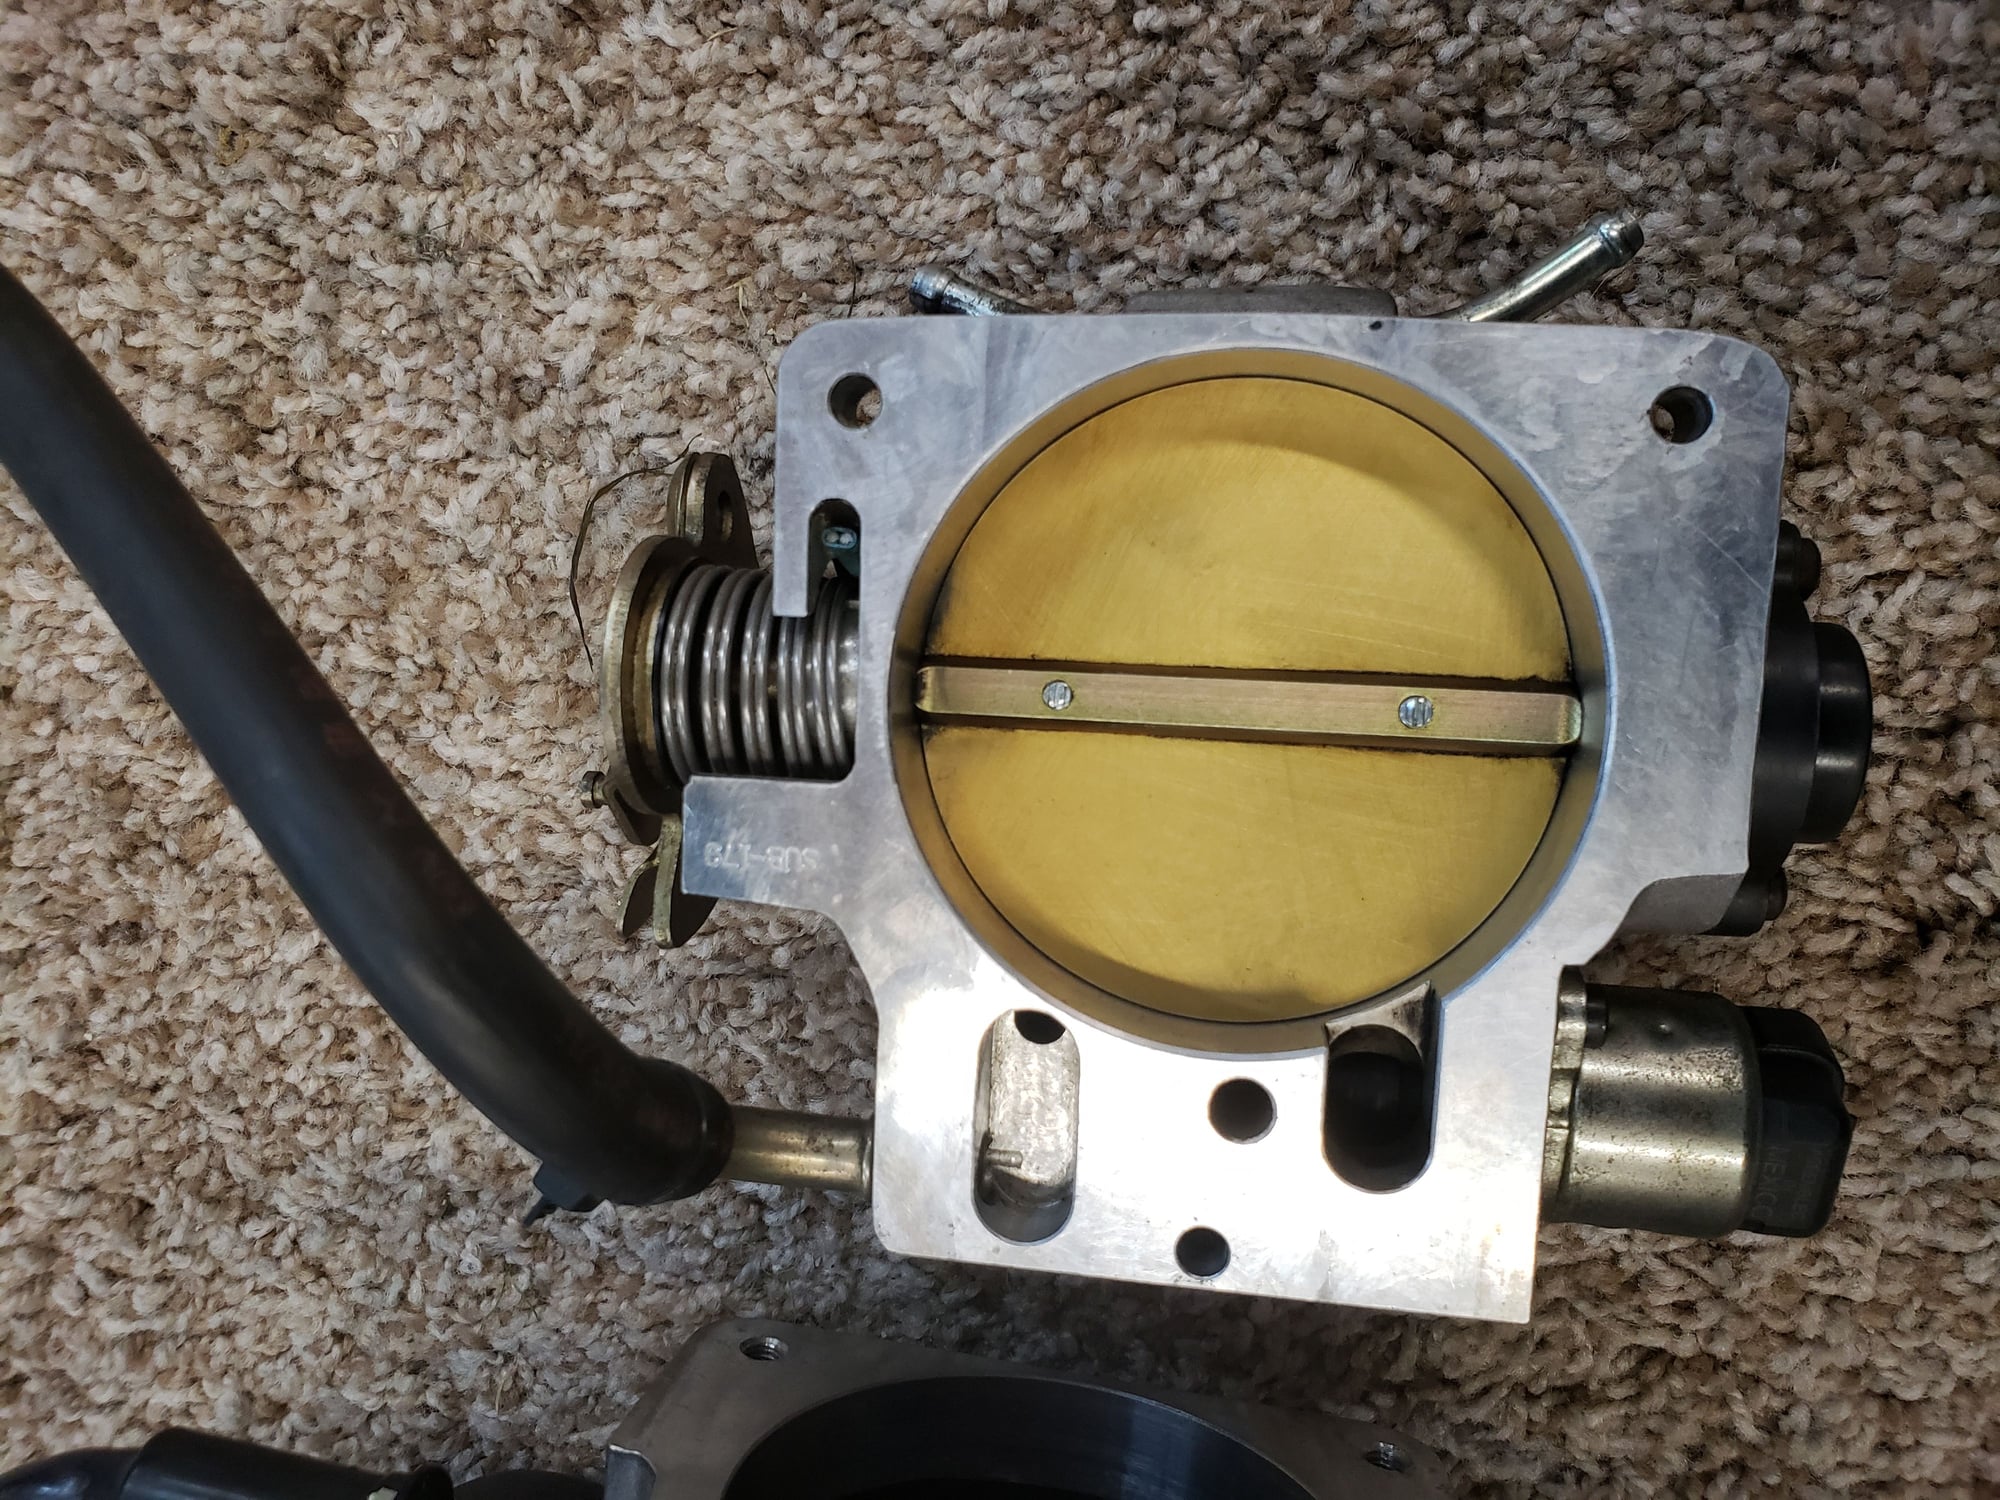  - Bbk SSI intake and bbk 85mm throttle body - Russellville, KY 42276, United States